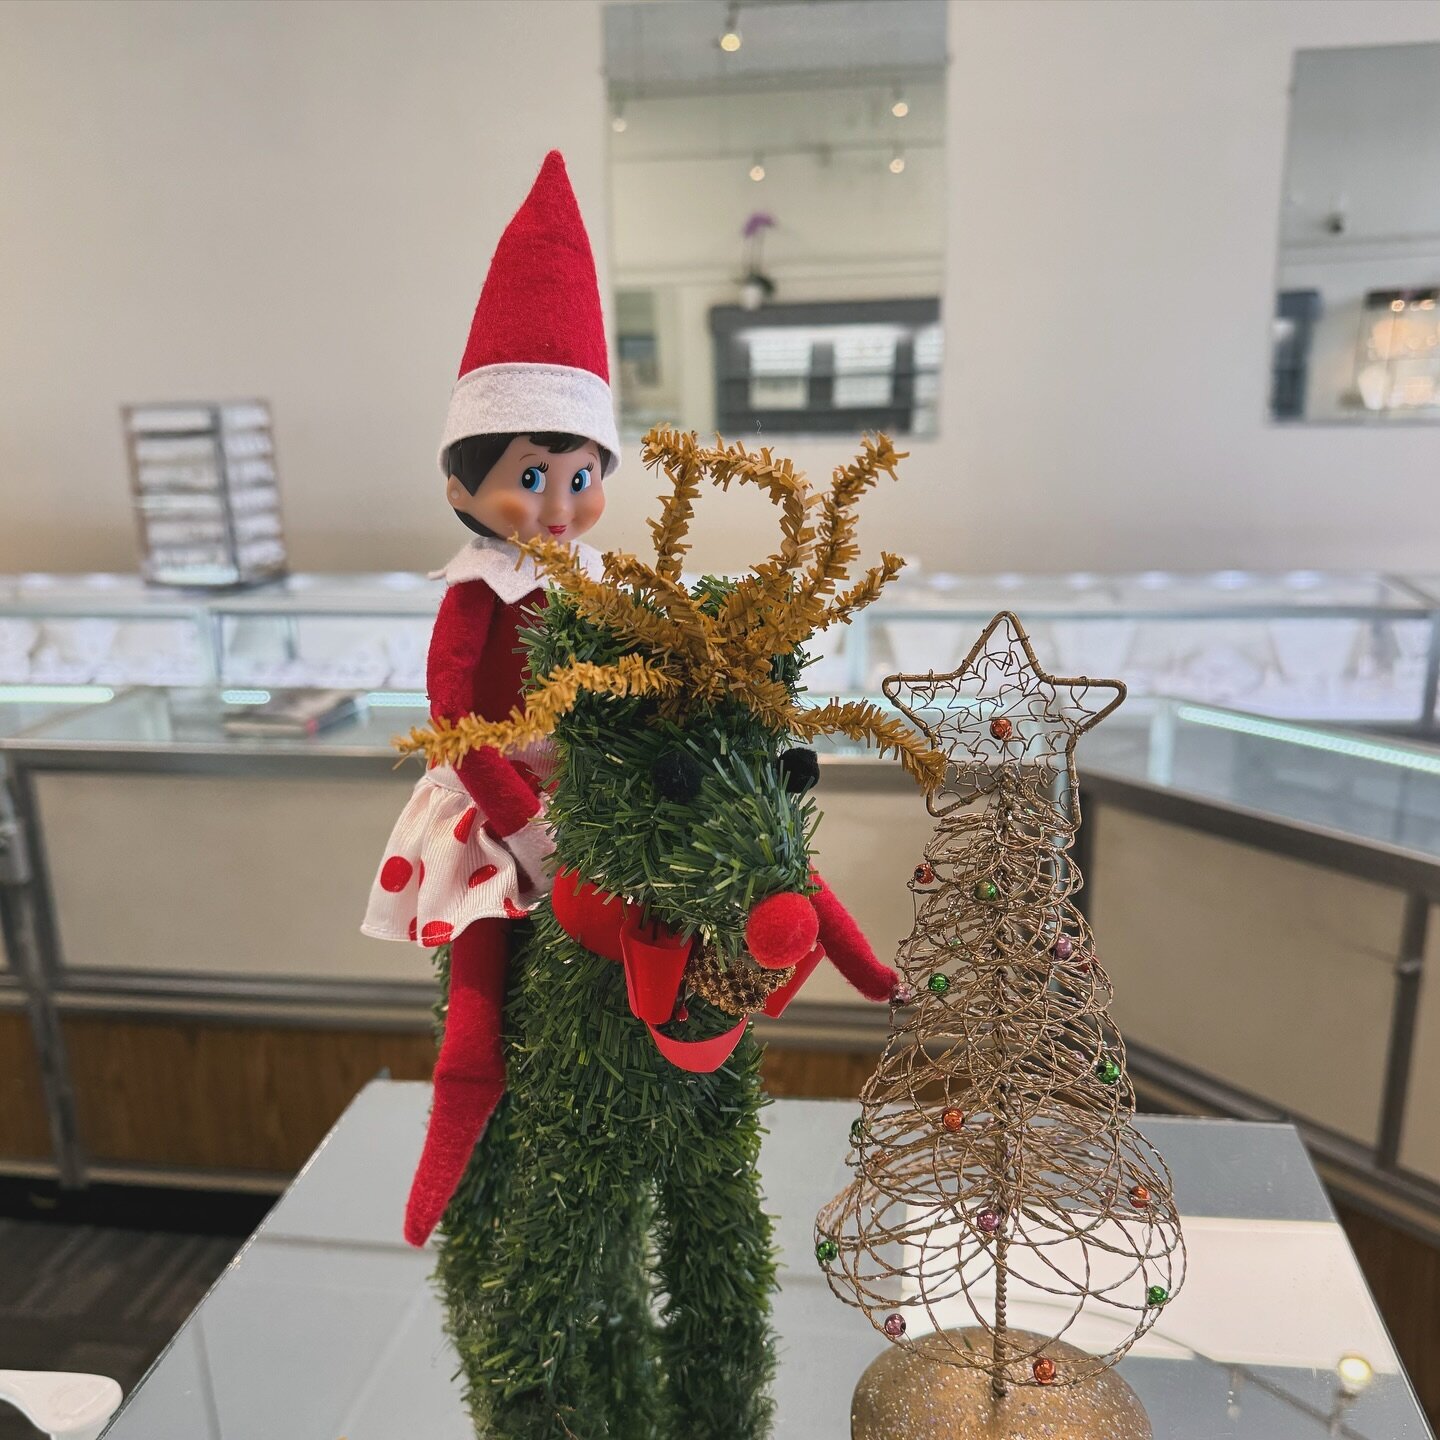 Sparkle is ready to ride back to North Pole to relax after a busy season.  She is watching over the store while we are here until 4 for your last minute shopping needs. #adventuresofsparkle #capecodjewelry @hyannismainstreet

#shopsmall #shoplocal #c